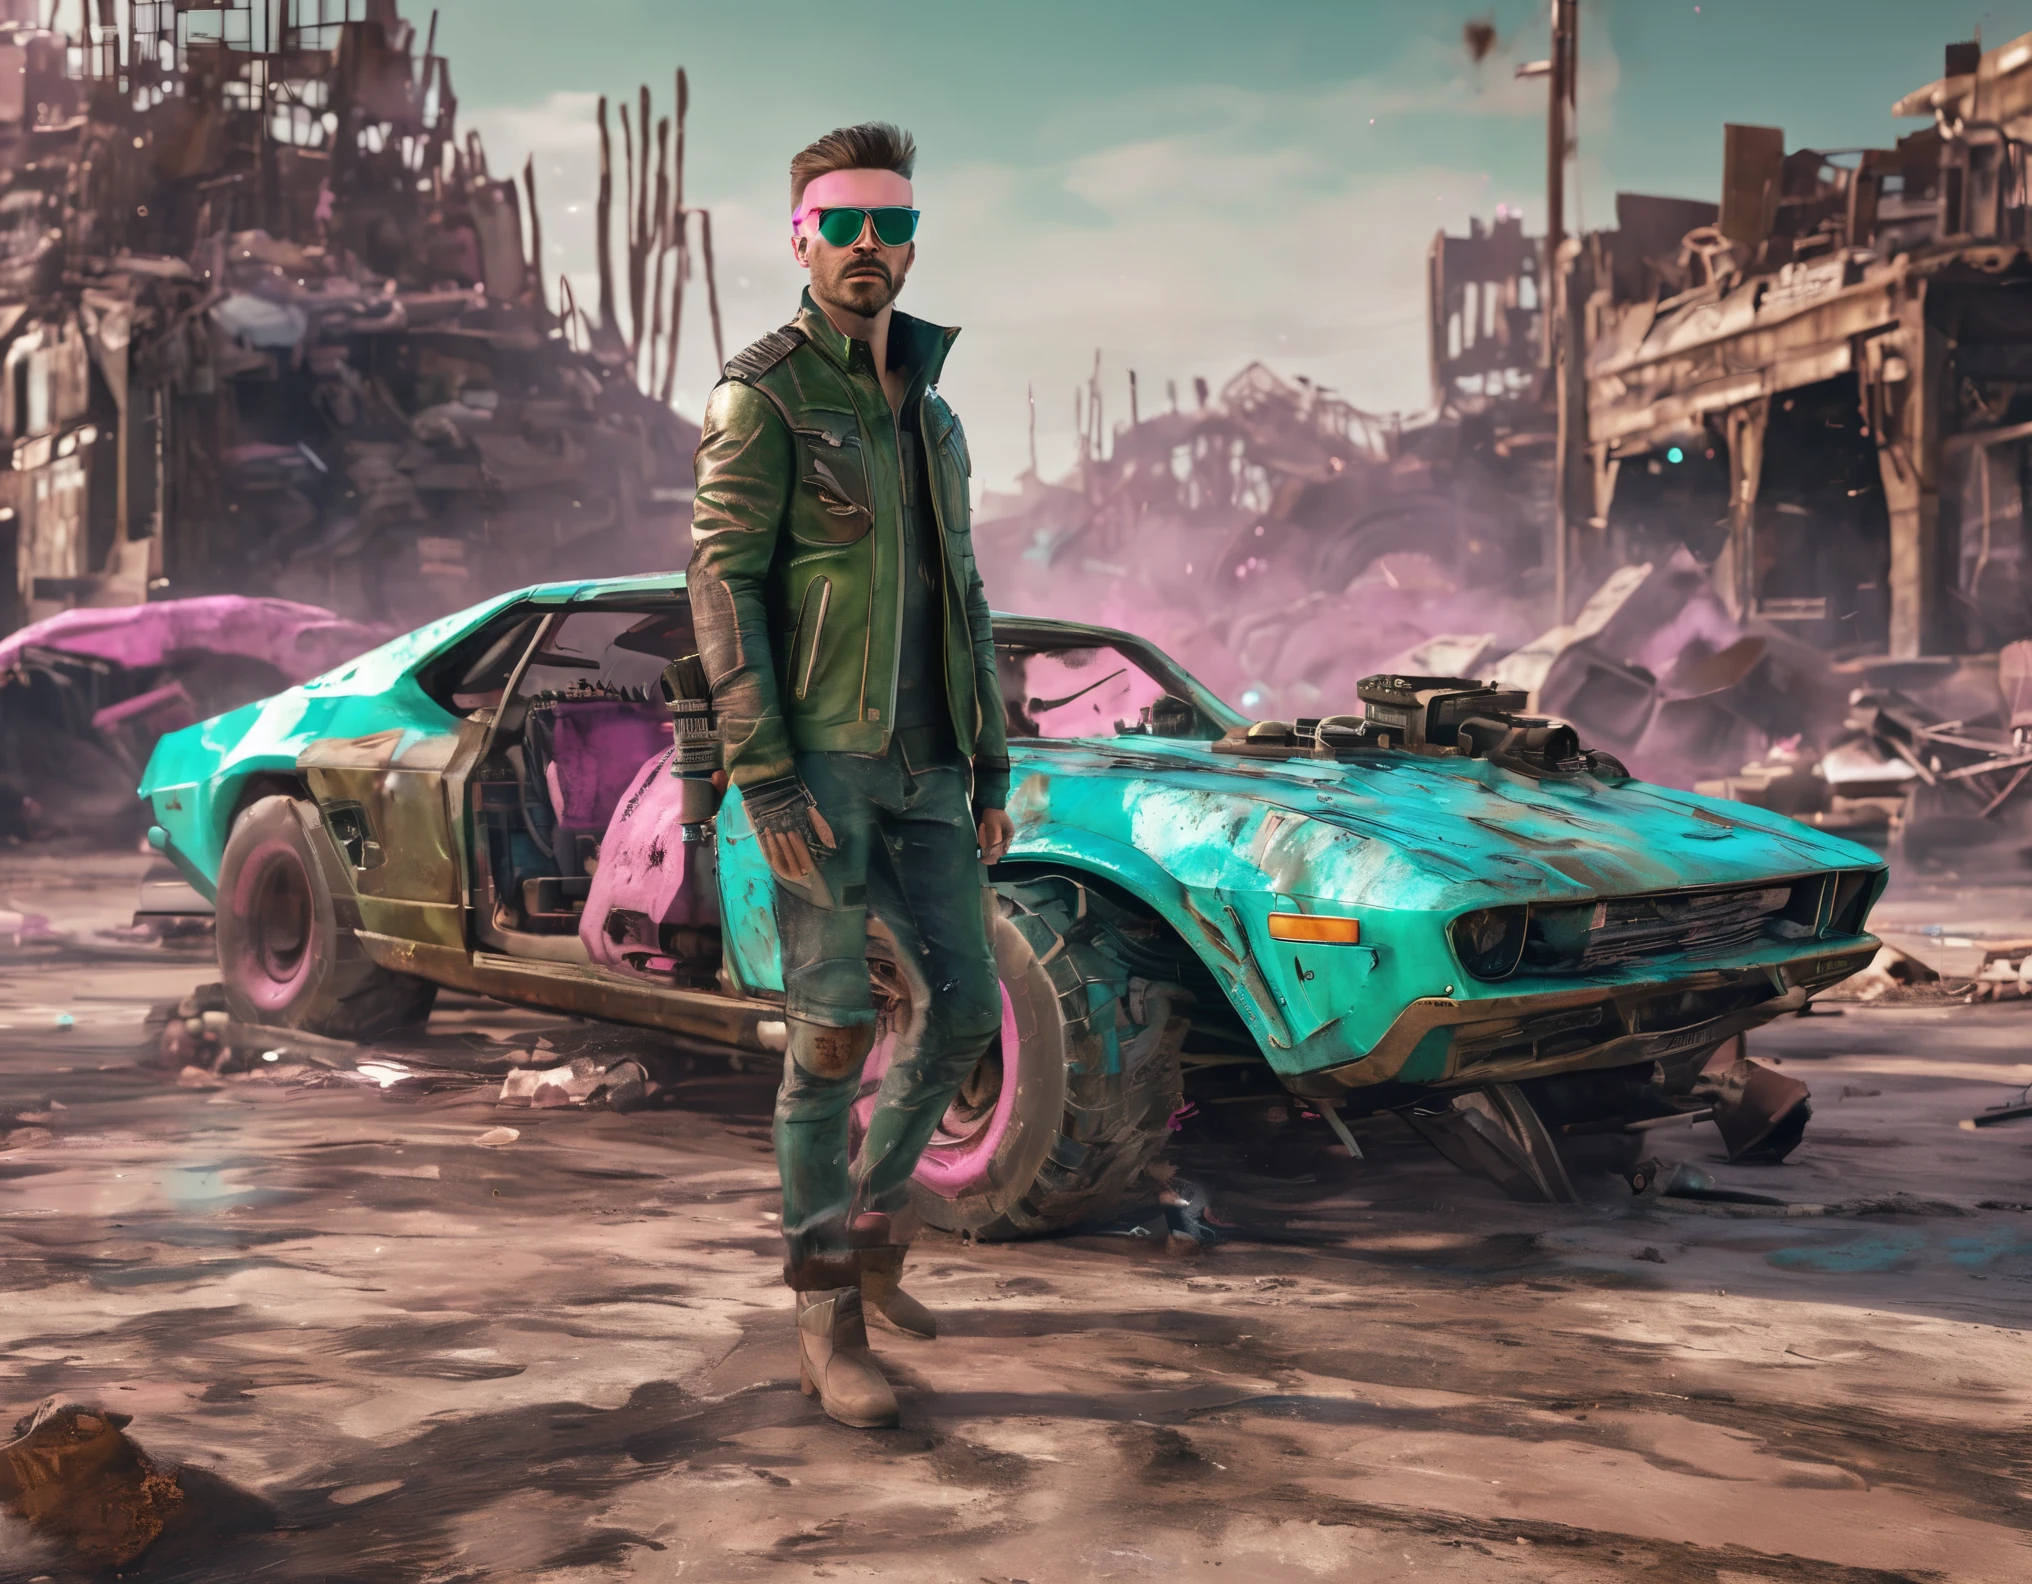 Post-apocalyptic wasteland:1.7, The backdrop of this masterpiece, Mad Max industrial style artifacts, epic, showing a destructive scene, abandoned factory, broken walls, rubble, barrels with fire inside, darkness, it is night, desolation, wind flying earth, showing a destructive apocalyptic scene, sand, Best possible quality, Ultra resolution 8K, Stunning illustration, best of all, Awarded, like being the best, leather jacket, pink sunglasses: 1.3, light ripped and frayed jeans, ((cyan, brown, green, white colors: 1.5) ), epic desert setting: 1.5, photorealistic: 1.4, skin texture: 1.4, super masterpiece, super detailed, hyper detailed, ((night, darkness: 1.6 )), 32K